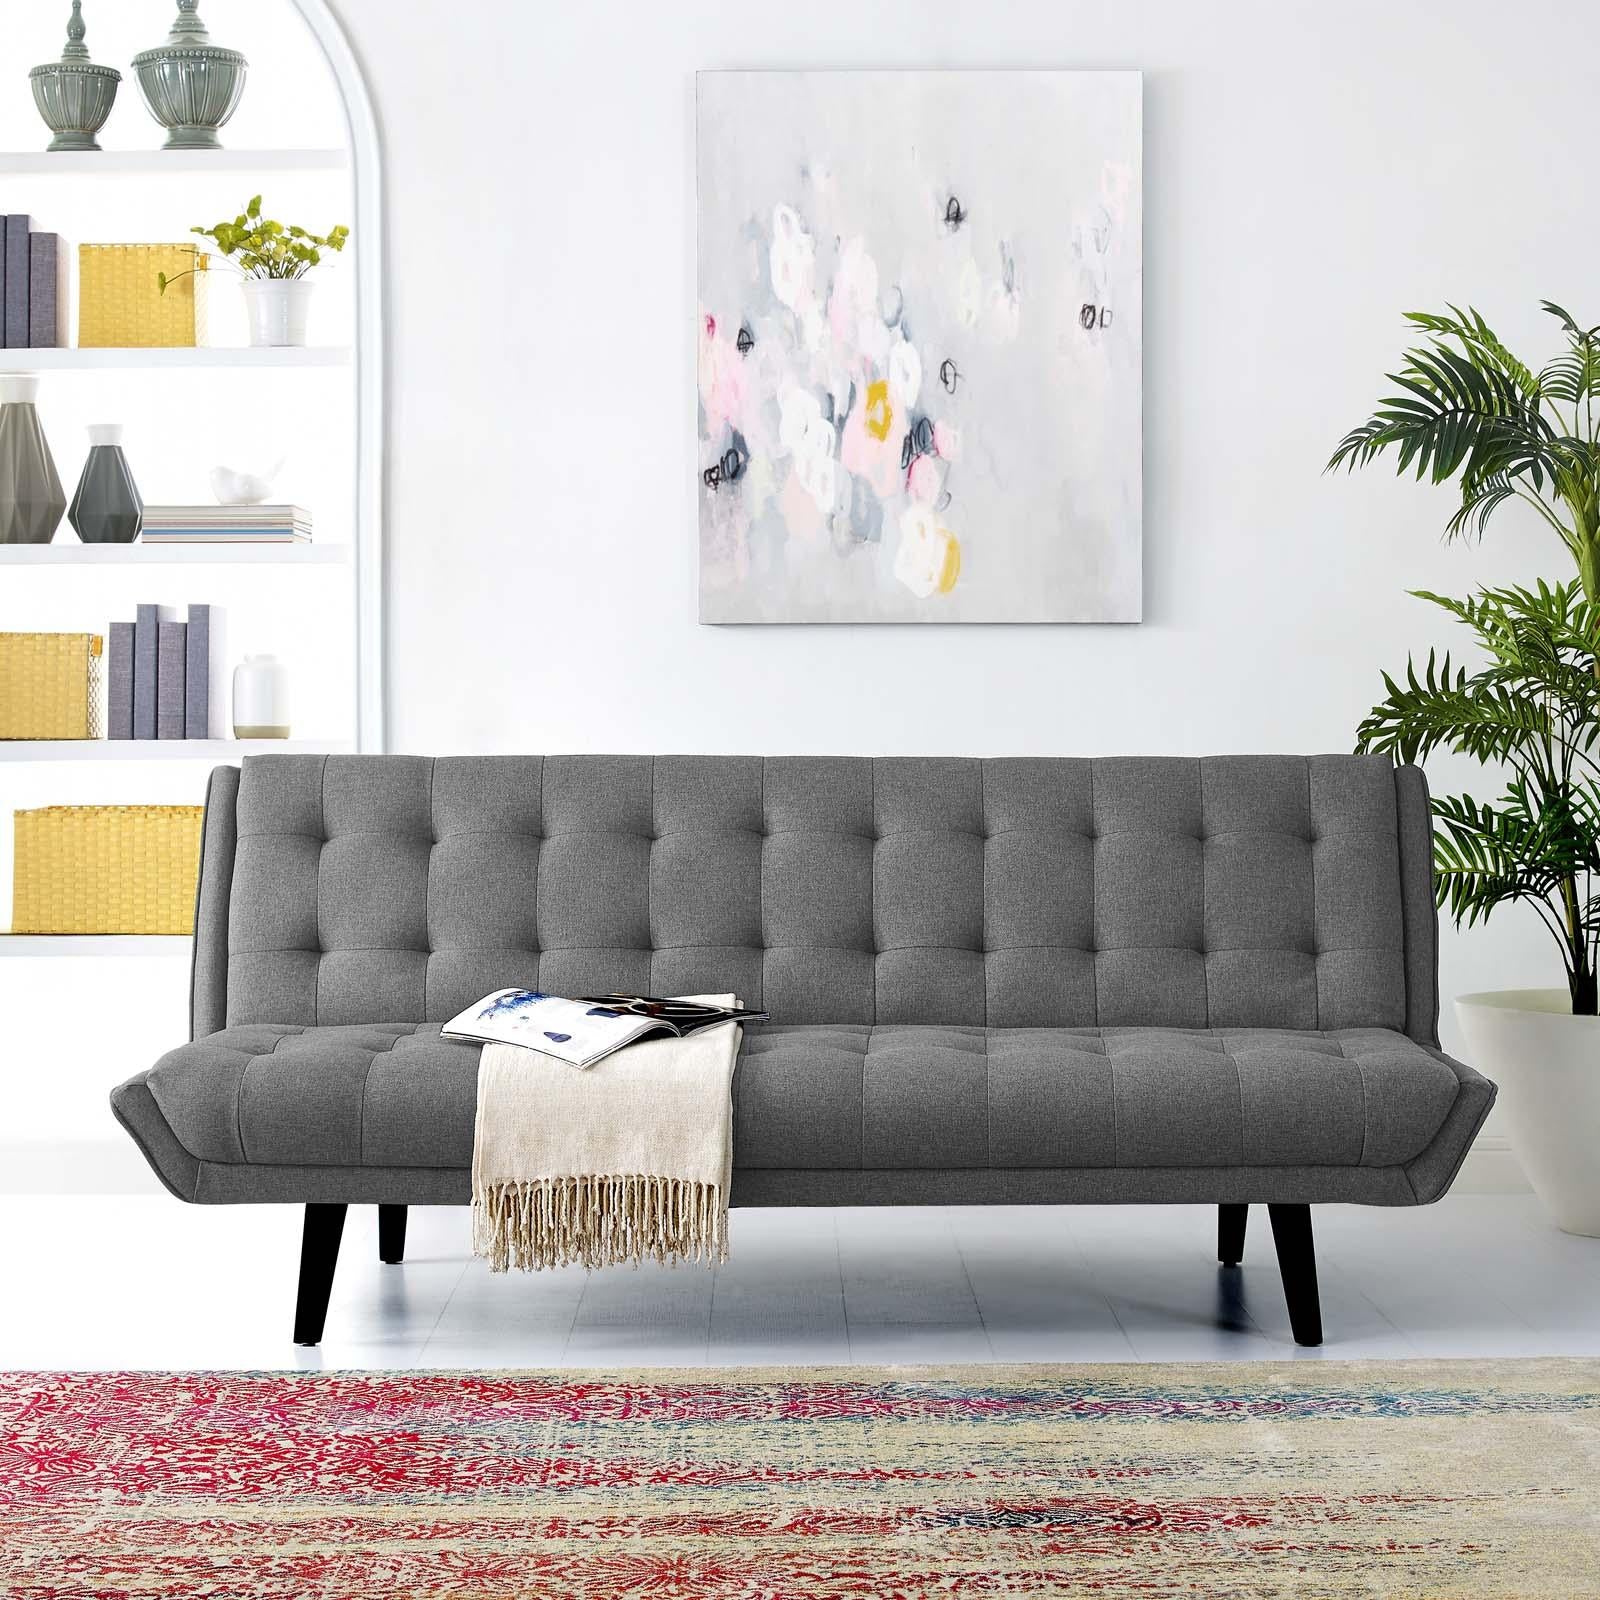 Modway Furniture Modern Glance Tufted Convertible Fabric Sofa Bed - EEI-3093